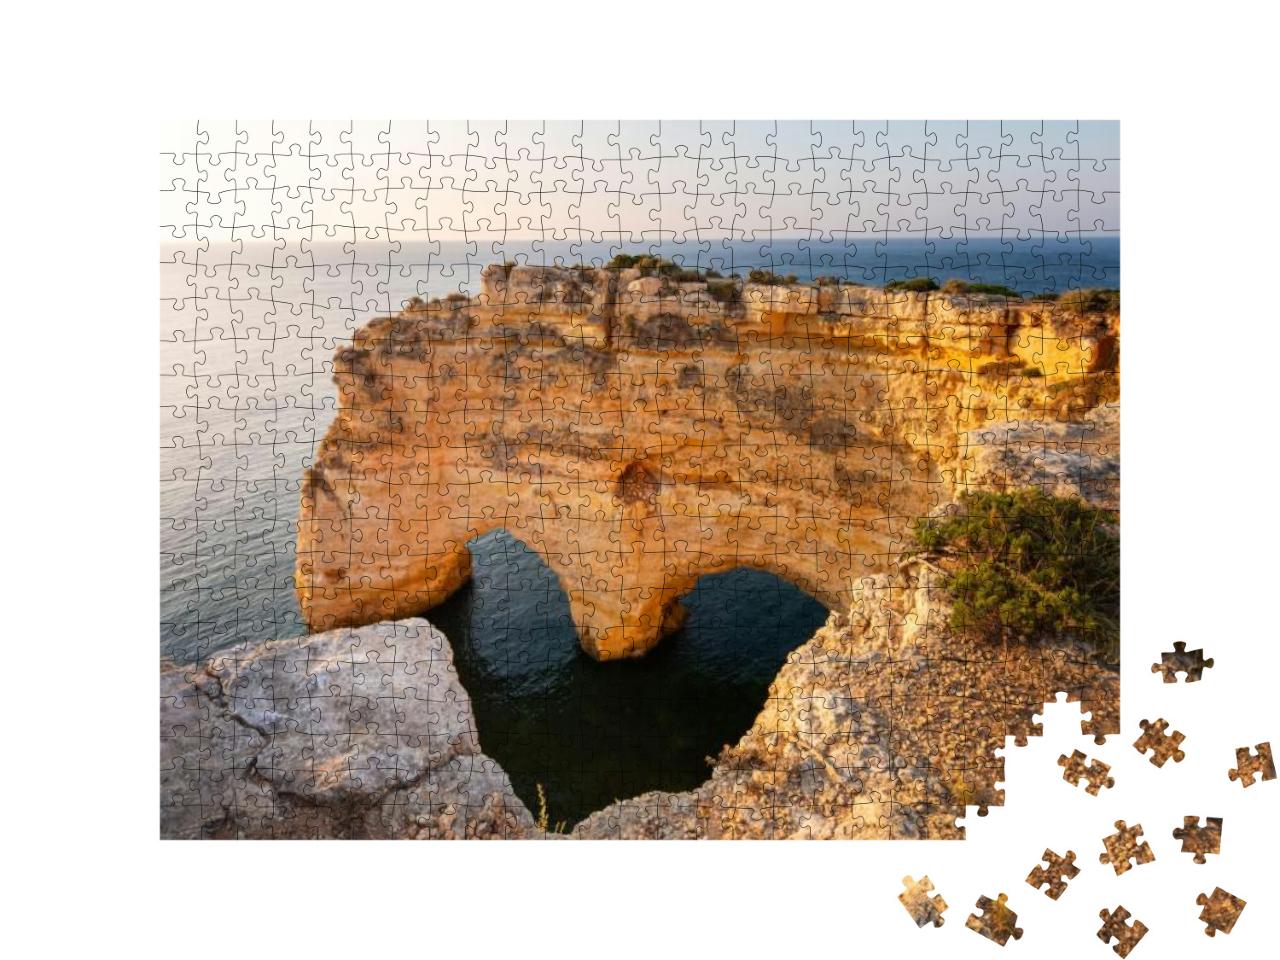 Heart Shaped Cliff in Algarve, Praia Marinha, Portugal... Jigsaw Puzzle with 500 pieces